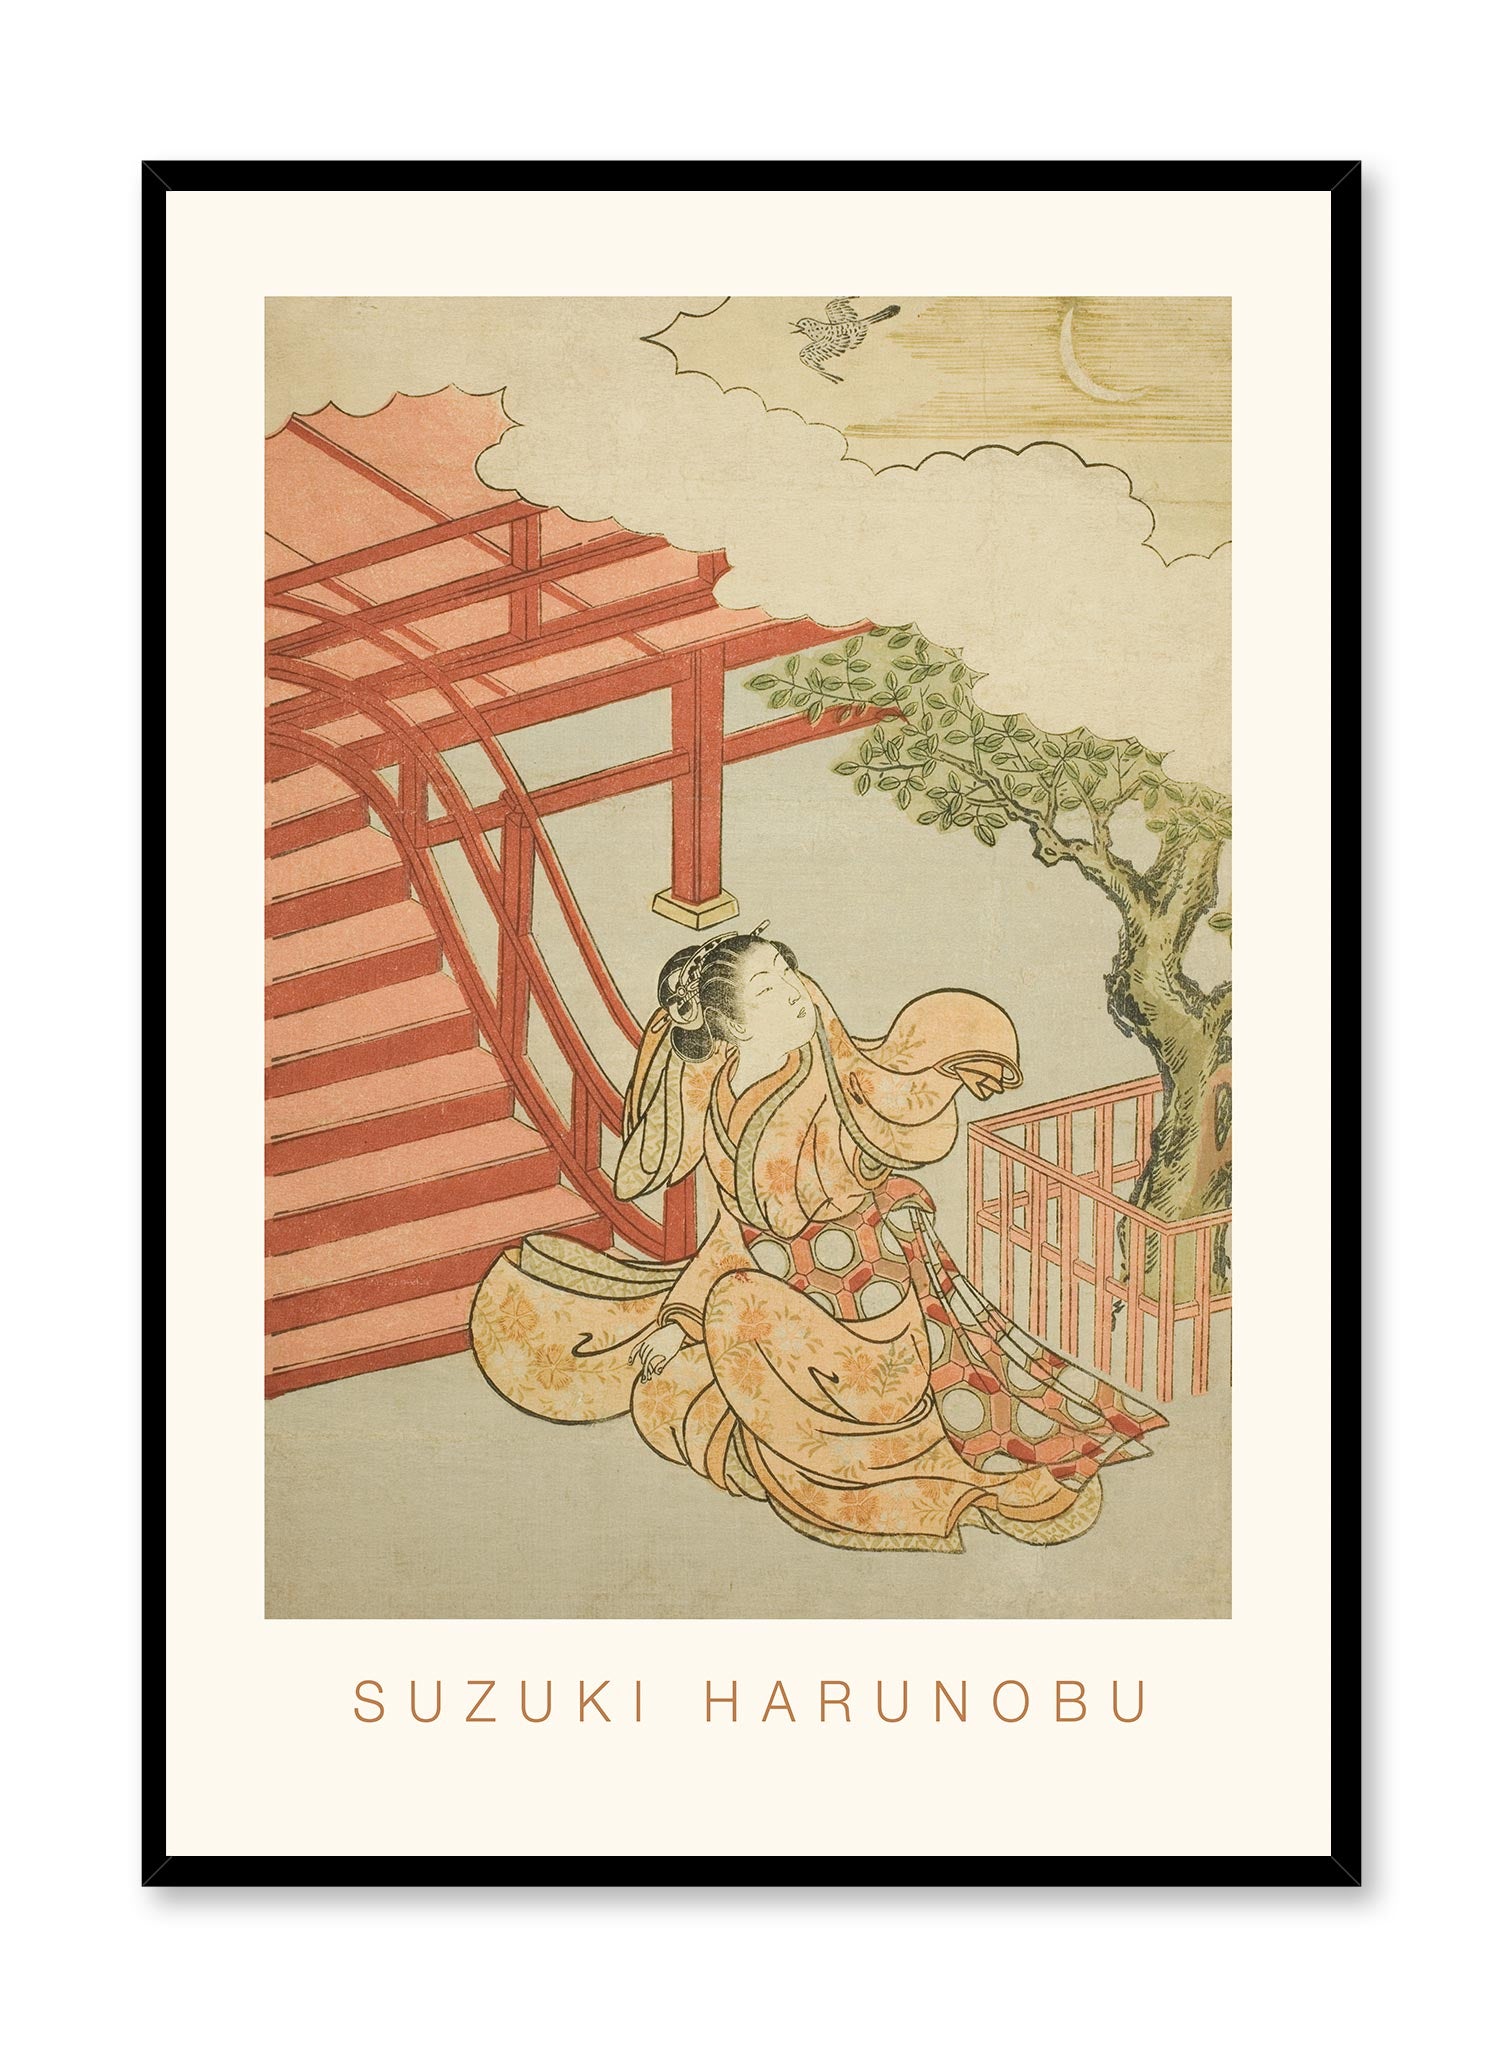 The Call of the Cuckoo from Above the Clouds is a minimalist gravure by Opposite Wall of Suzuki Harunobu's The Call of the Cuckoo from Above the Clouds which is a parody of Minamoto no Yorimasa.